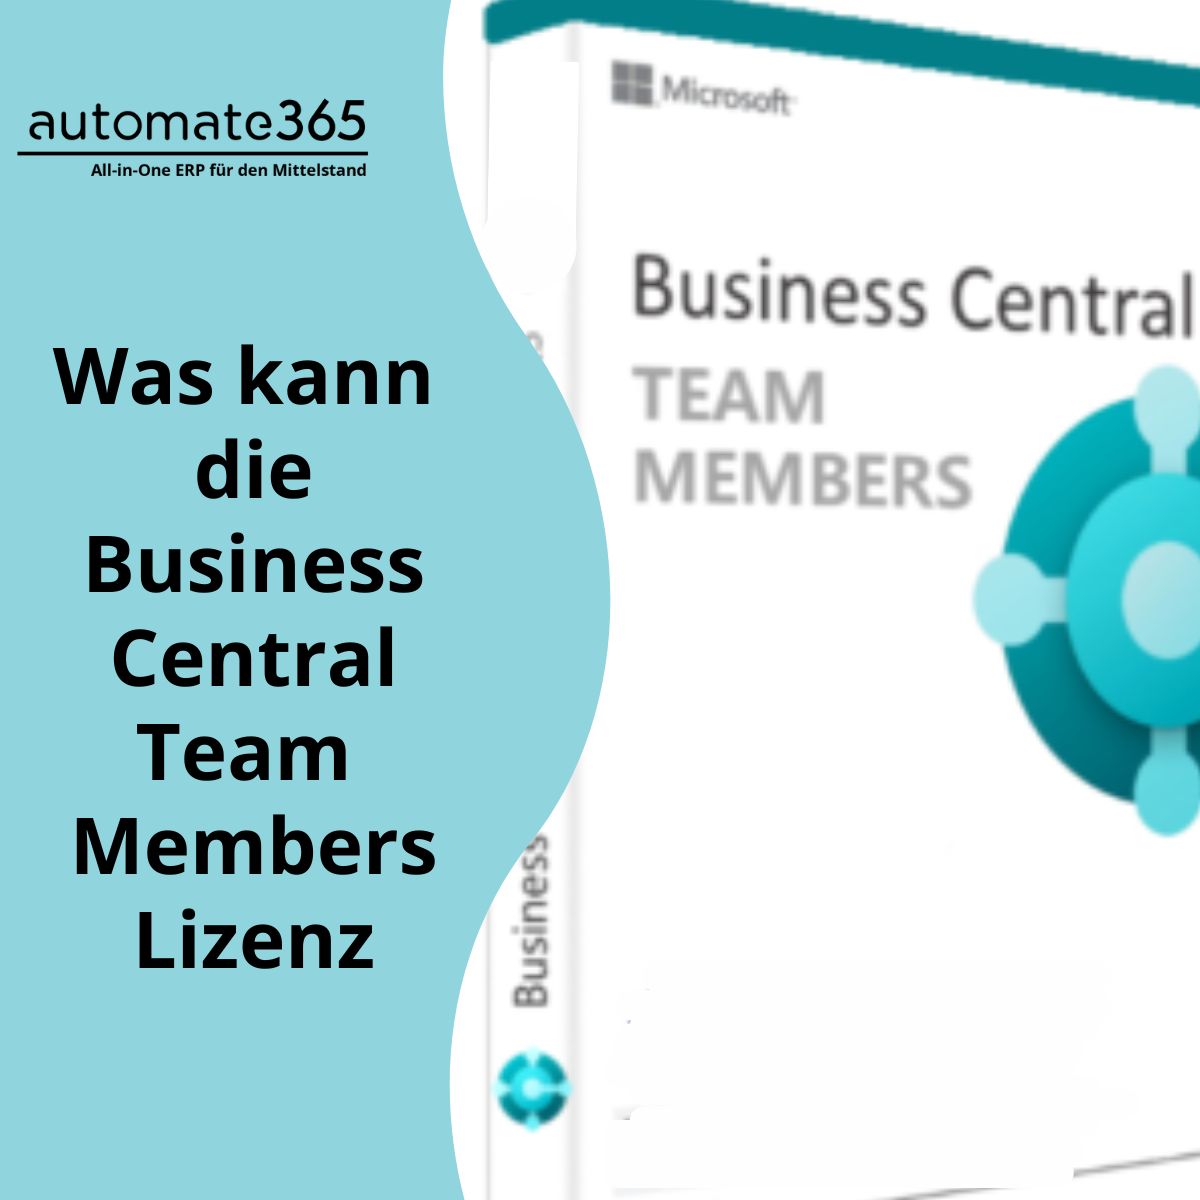 Team Members-Lizenz in Business Central